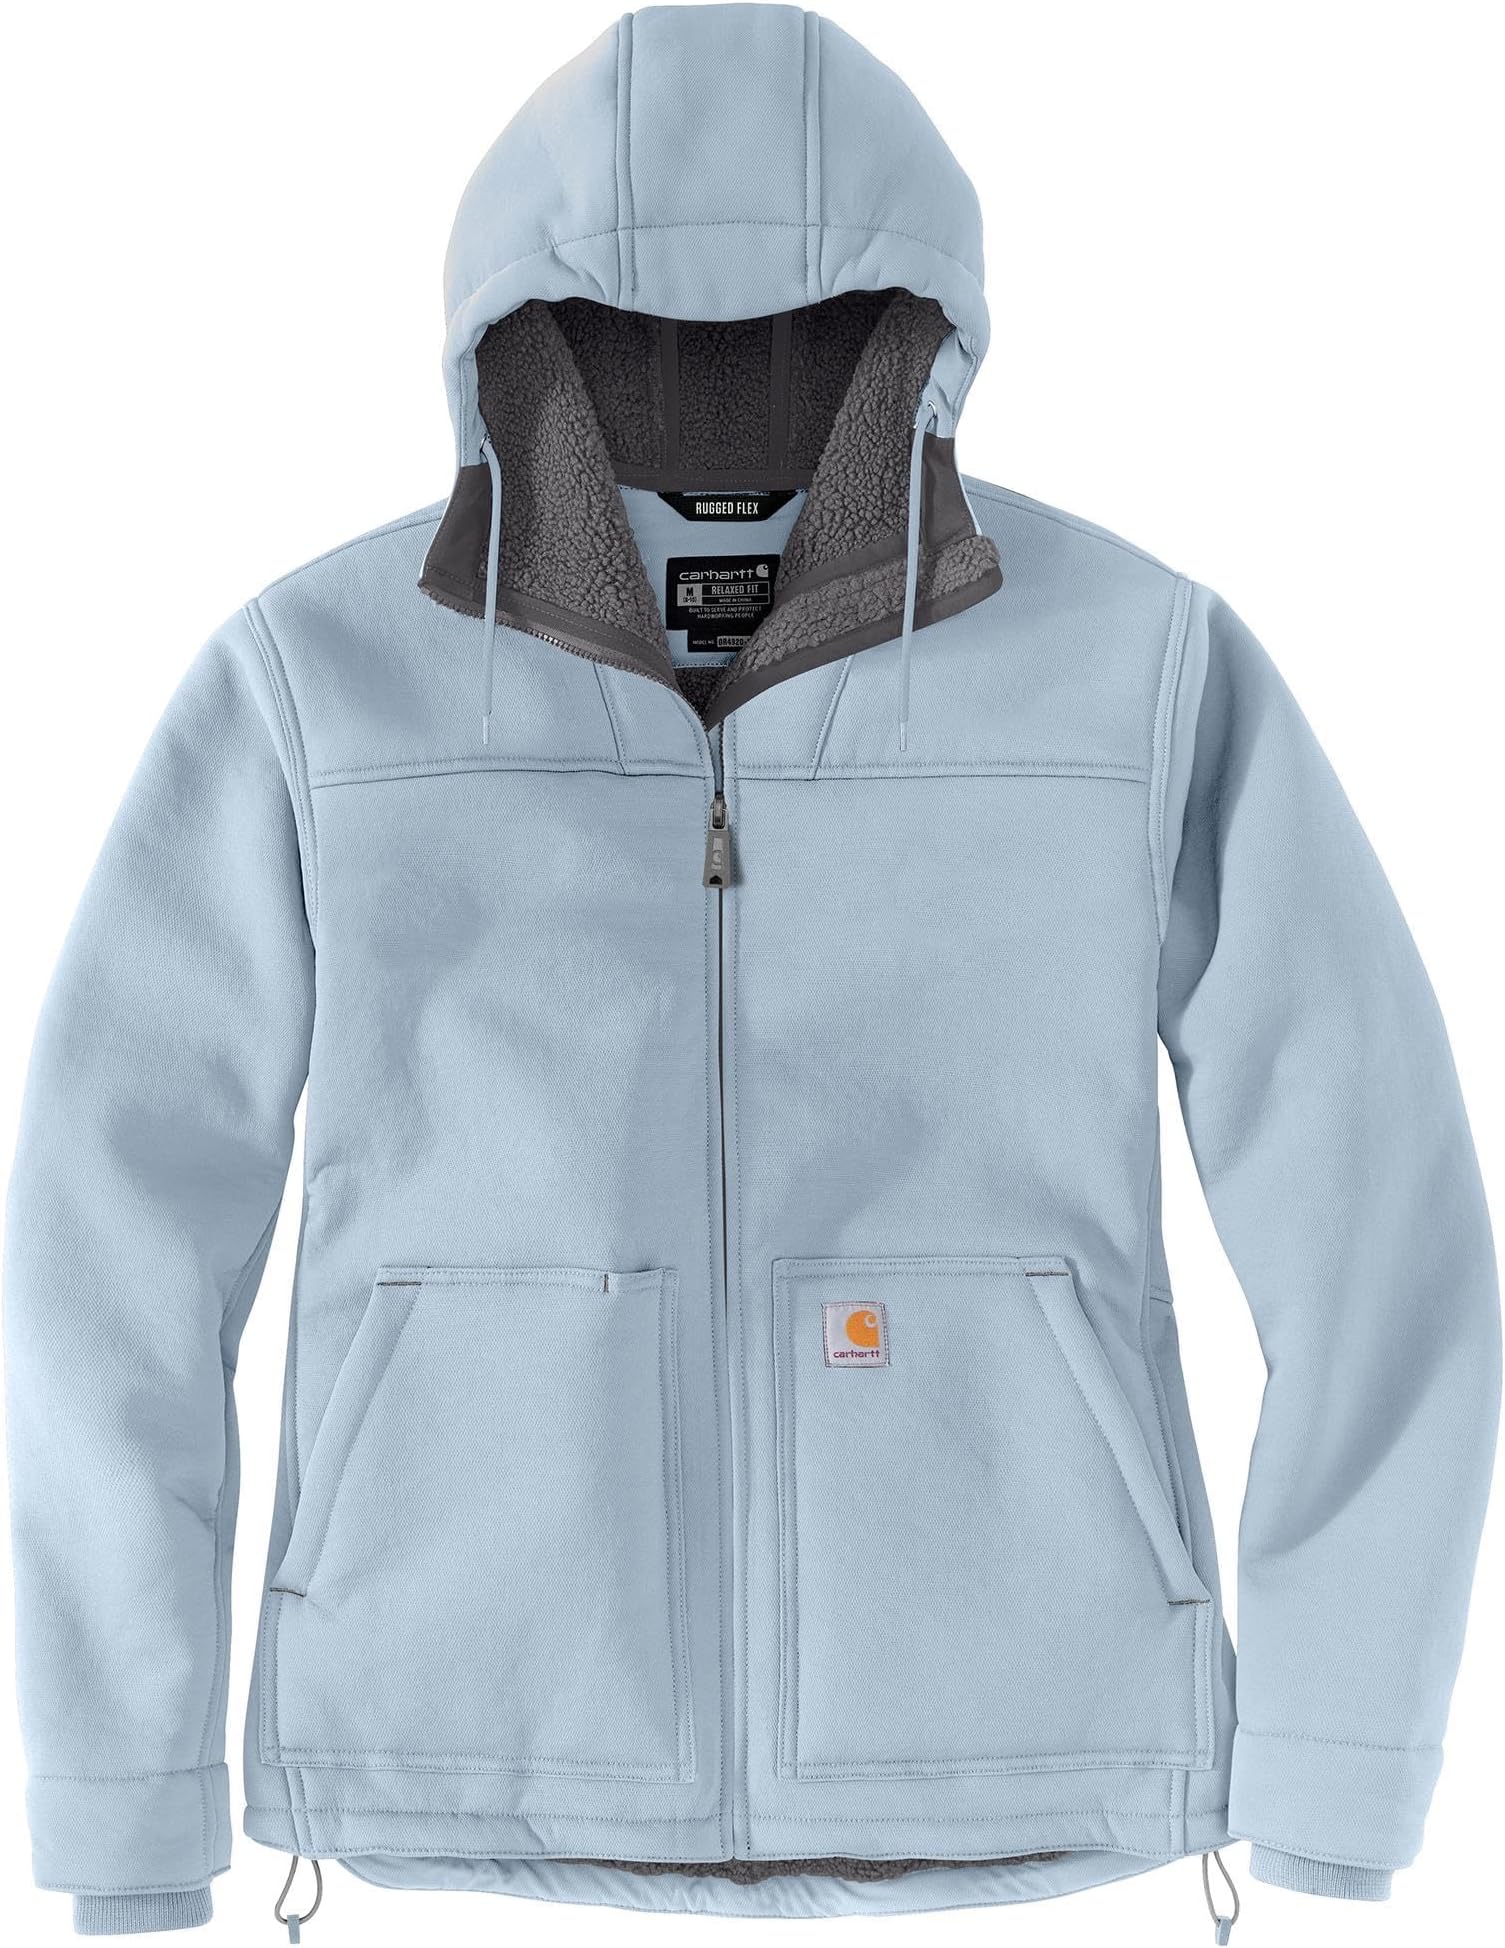 Куртка Super Dux Relaxed Fit Sherpa Lined Jacket Carhartt, цвет Neptune neptune bay